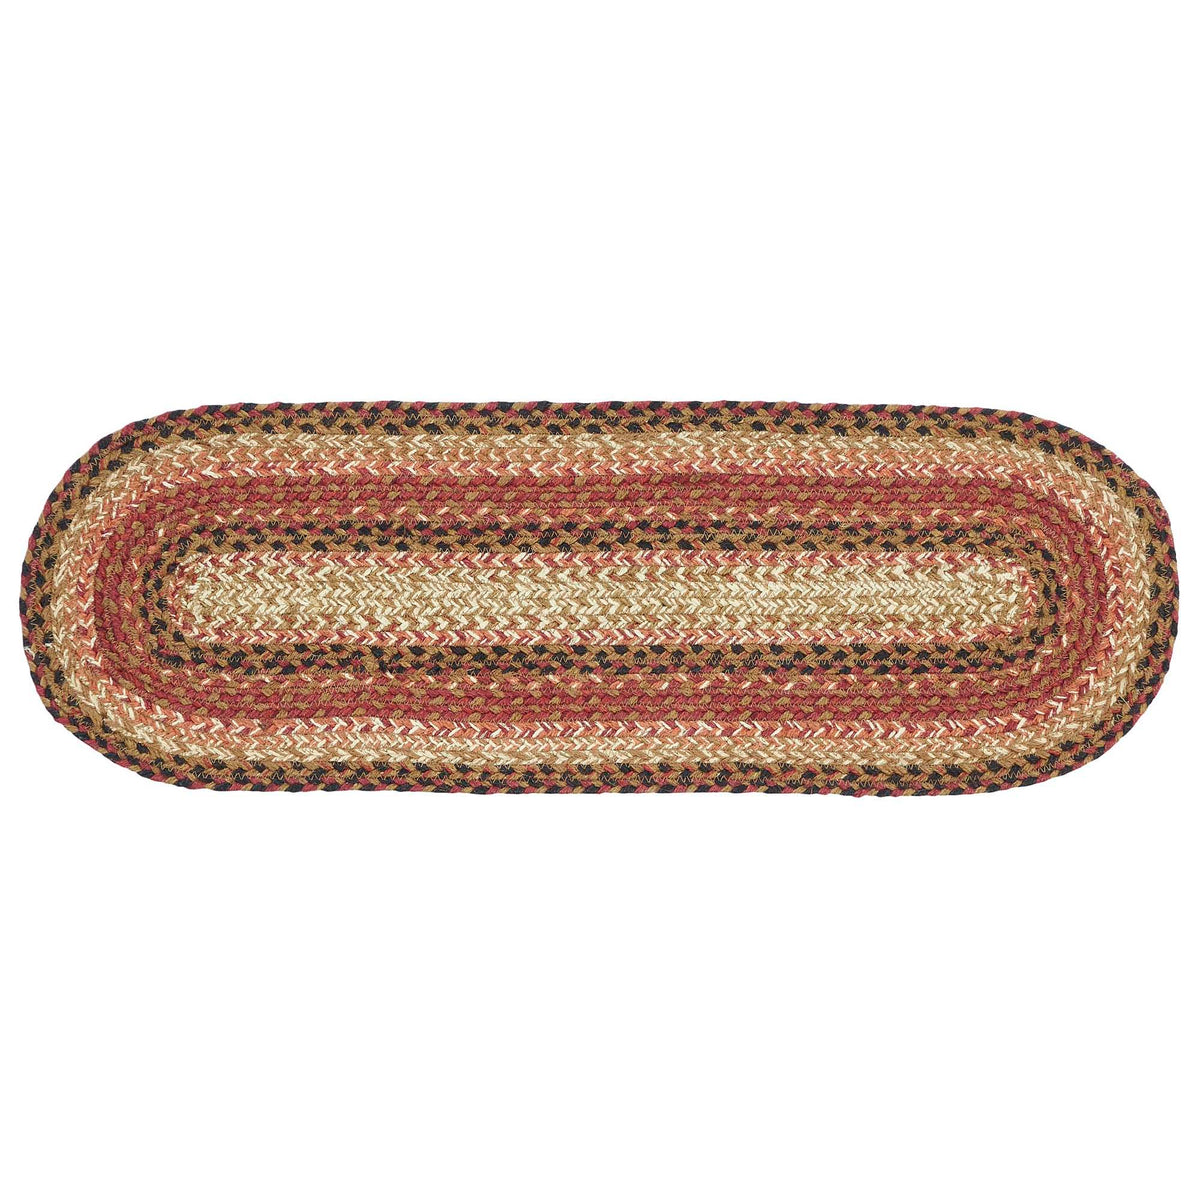 Ginger Spice Jute Stair Tread Oval Latex 8.5x27